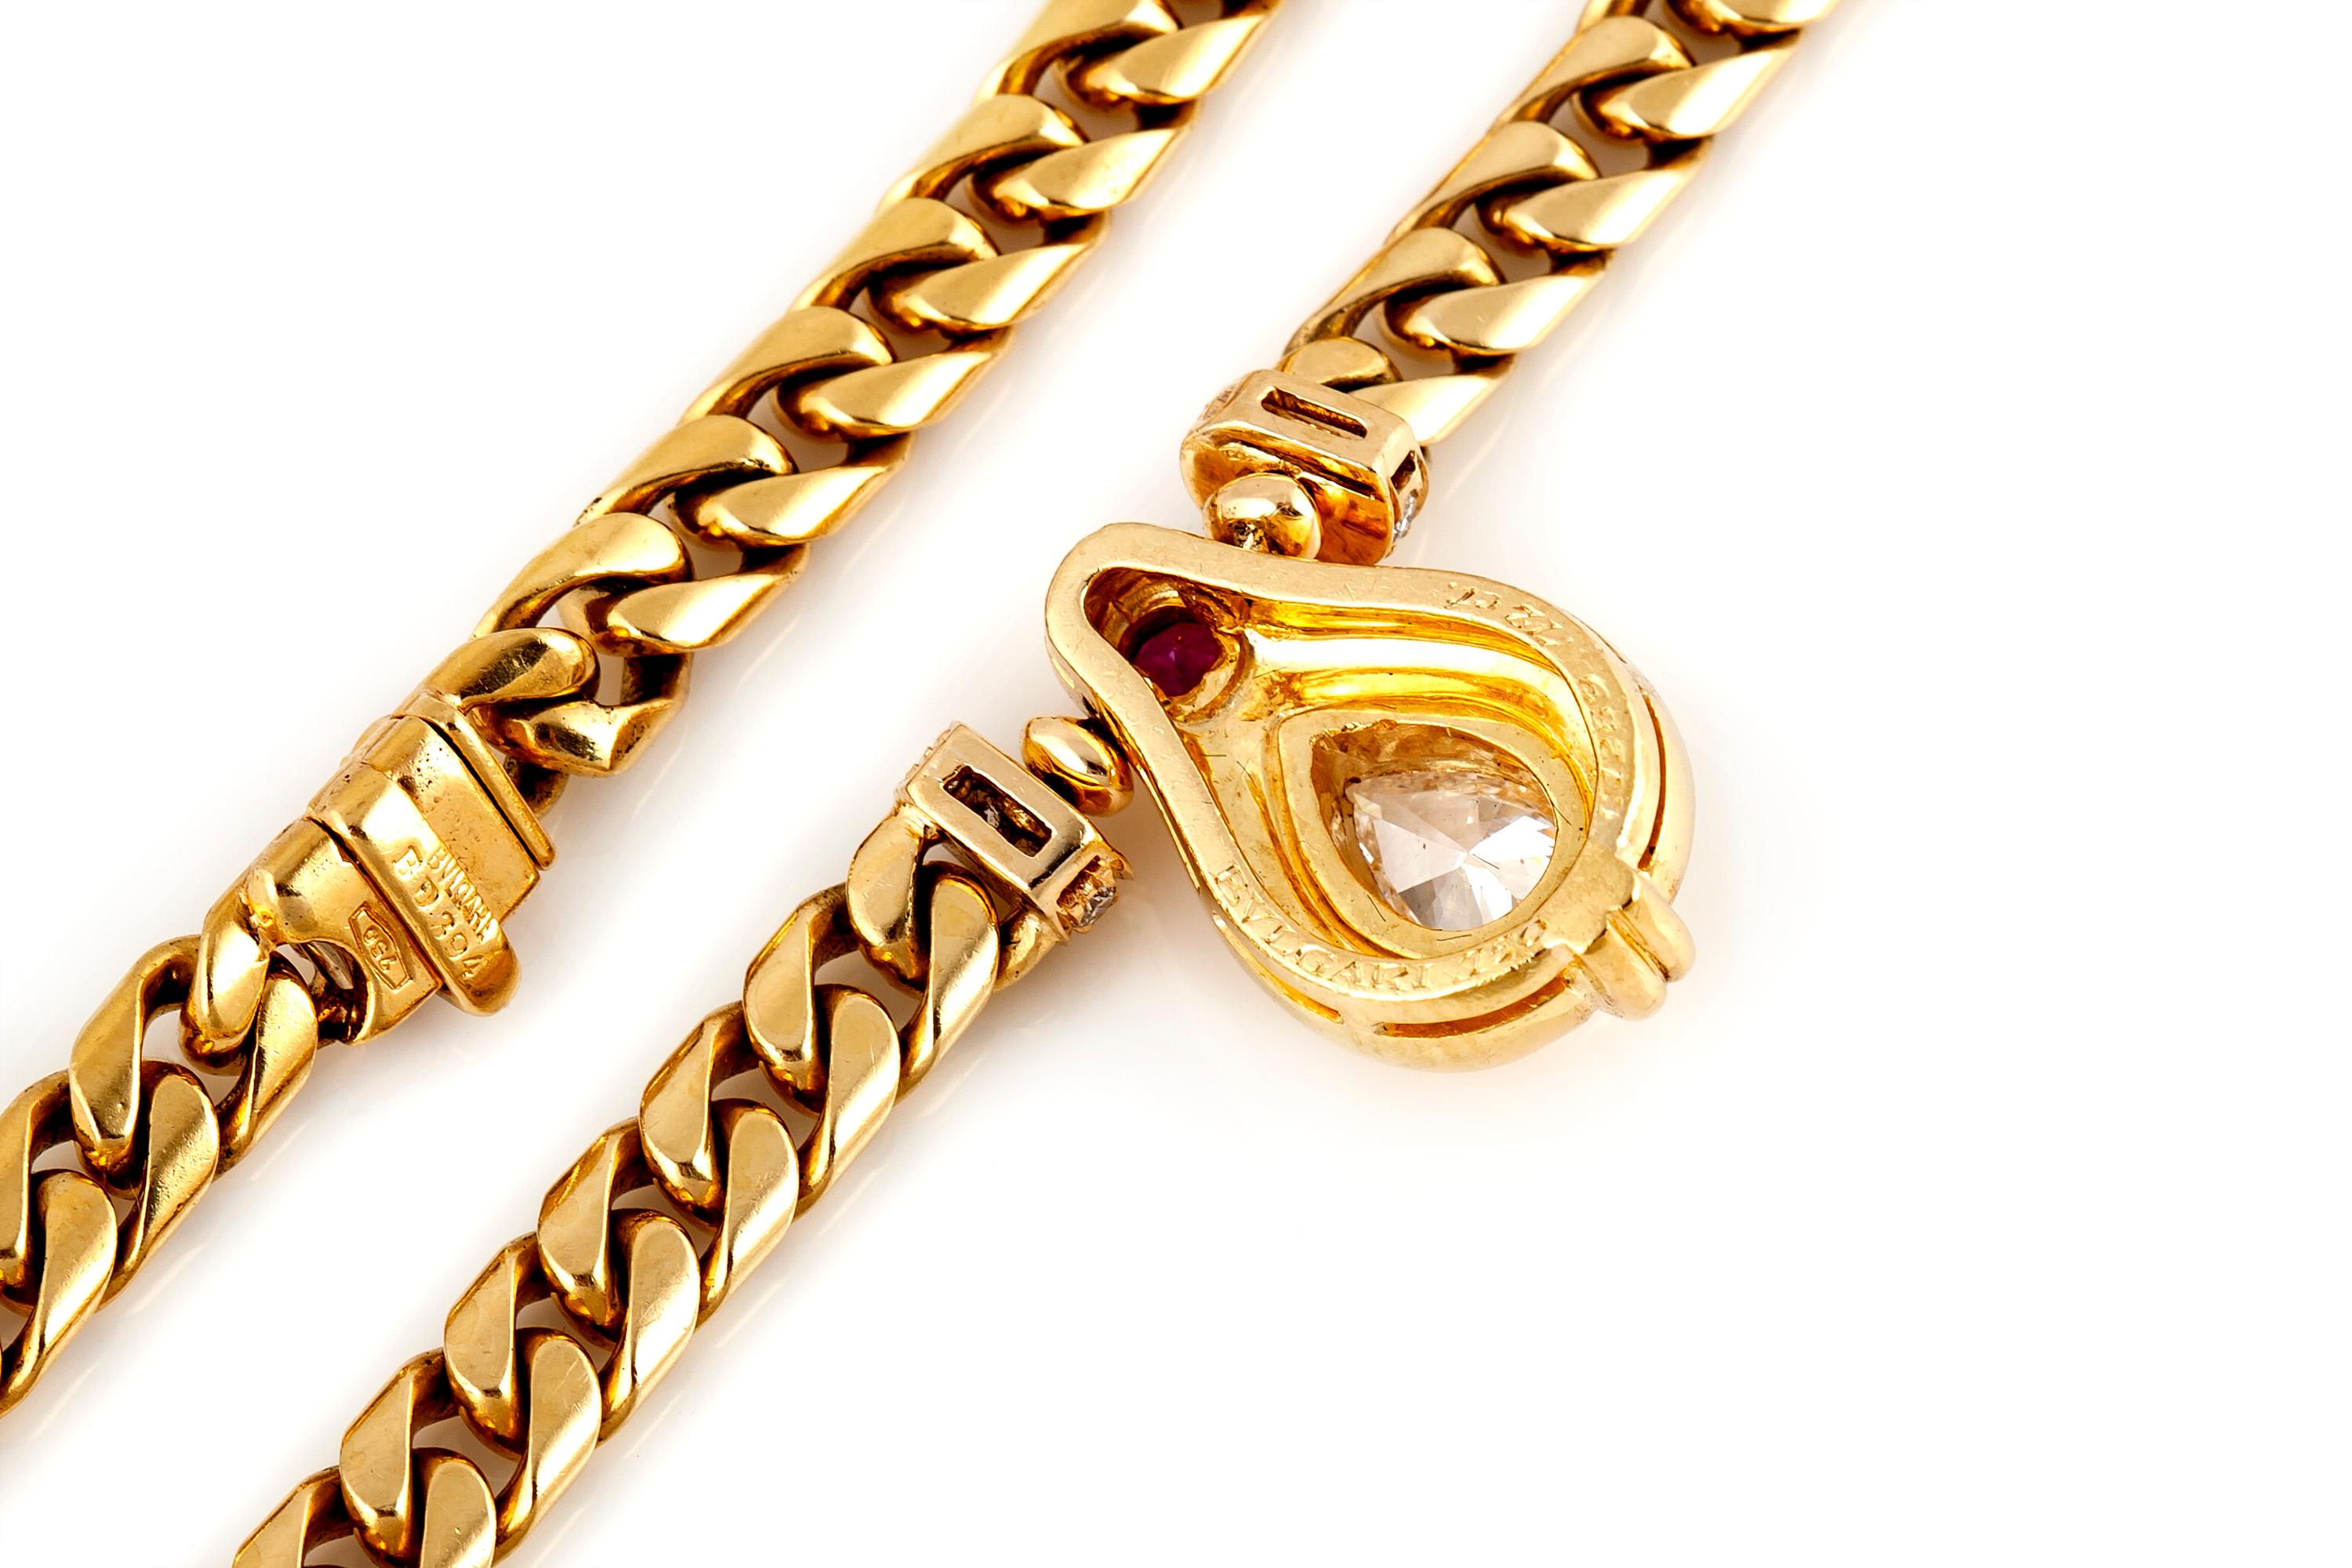 Bvlgari necklace, finely crafted in 18 k yellow gold, featuring pear shaped diamond at the center, weighing 0.73 carat, accented with round ruby and brilliant cut diamonds. Circa 1980's.